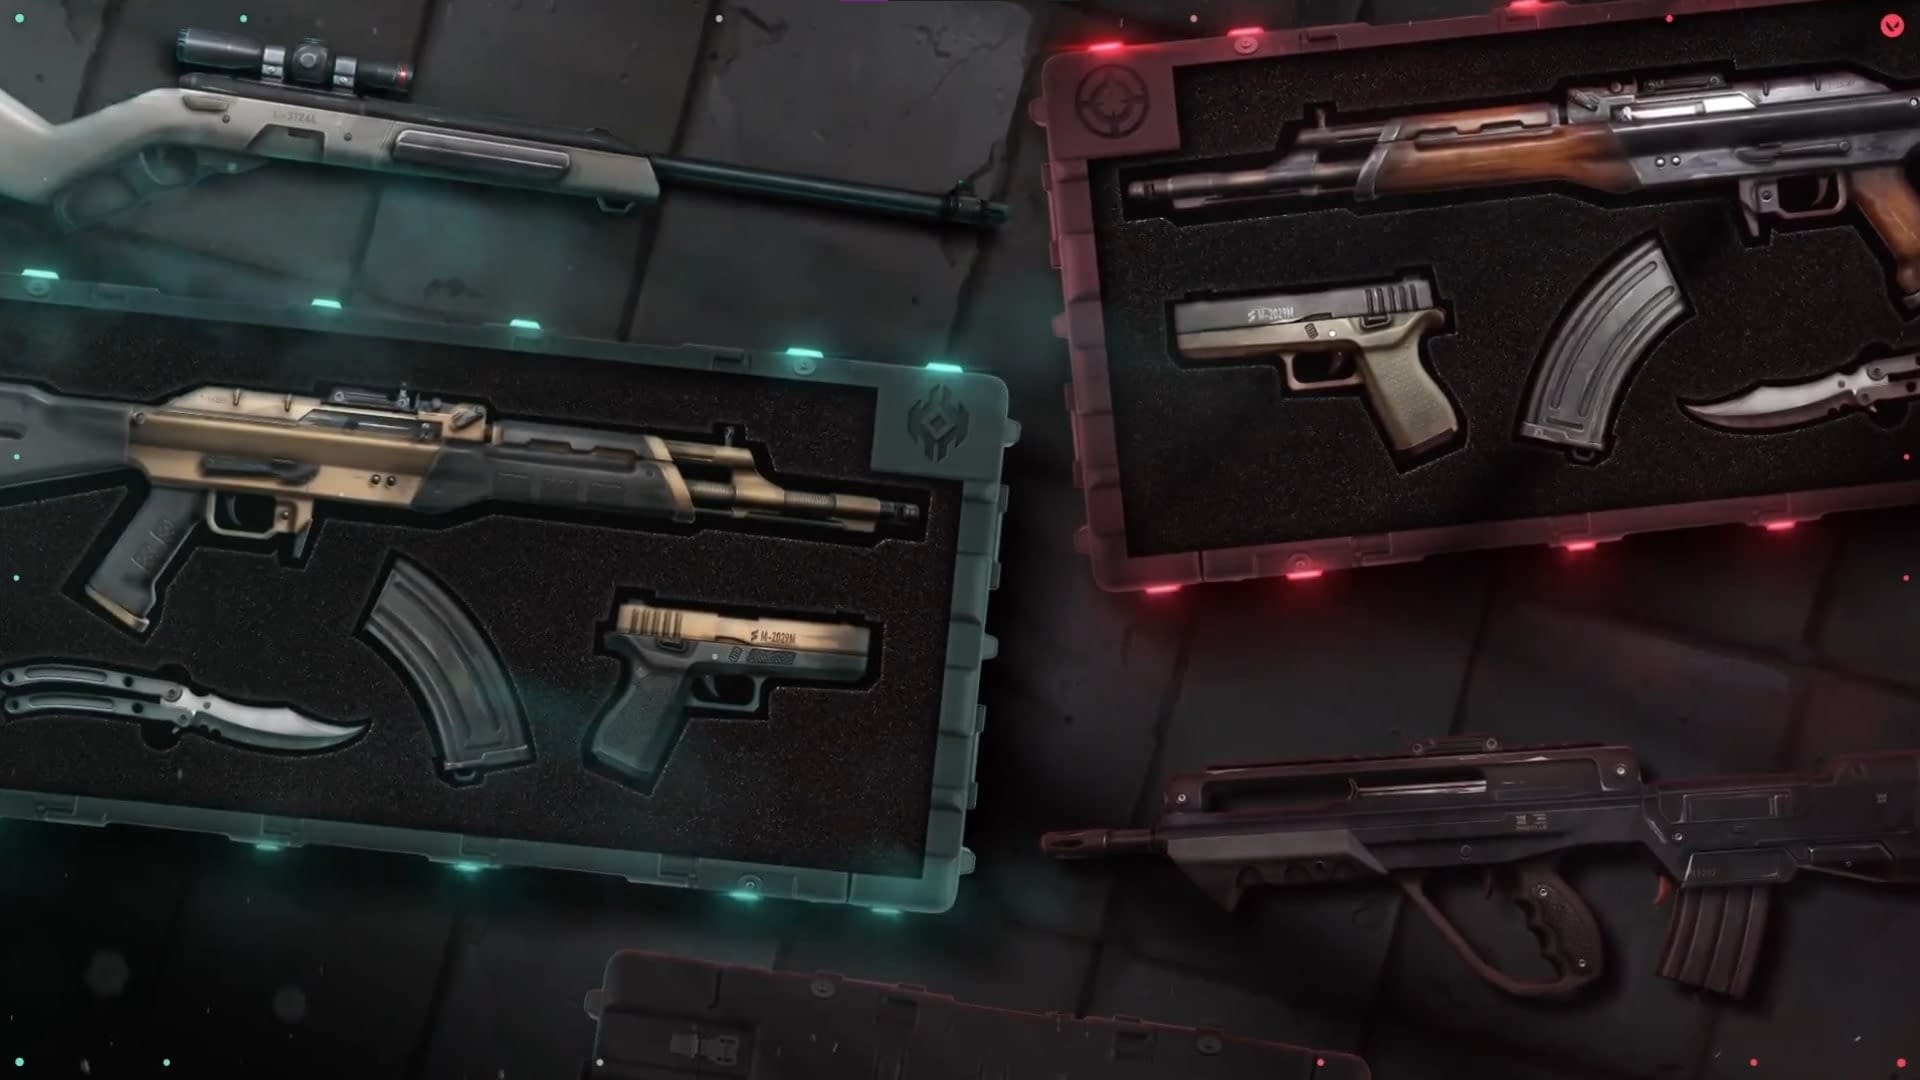 New Valorant weapon pack comes from CS:GO style